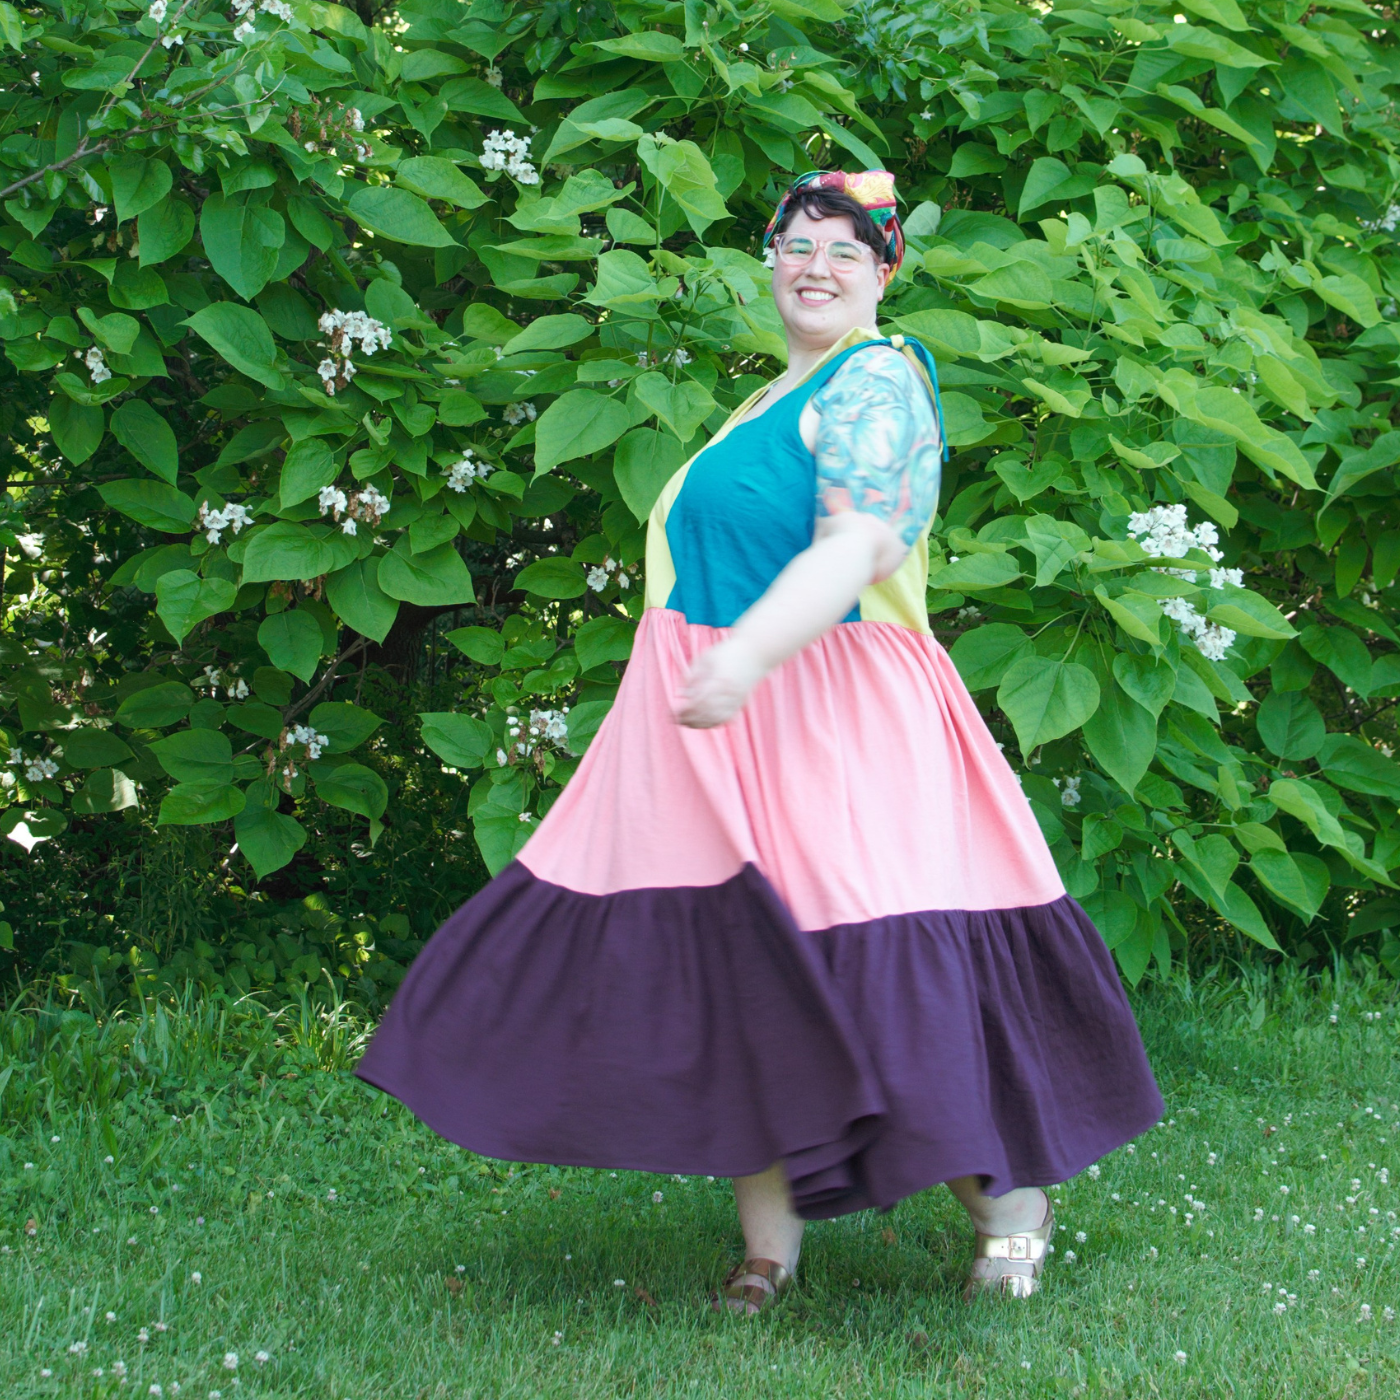 Shannon looks at the camera mid-spin in the grass. She is wearing a multi-tiered dress (a camisole vertically half yellow and blue, leading to a pink tier and then a purple tier that lands slightly above her ankles) and gold sandals and has a red, yellow and green headband. She is standing in front of a row of tall leafy bushes, some with bursts of small white flowers.